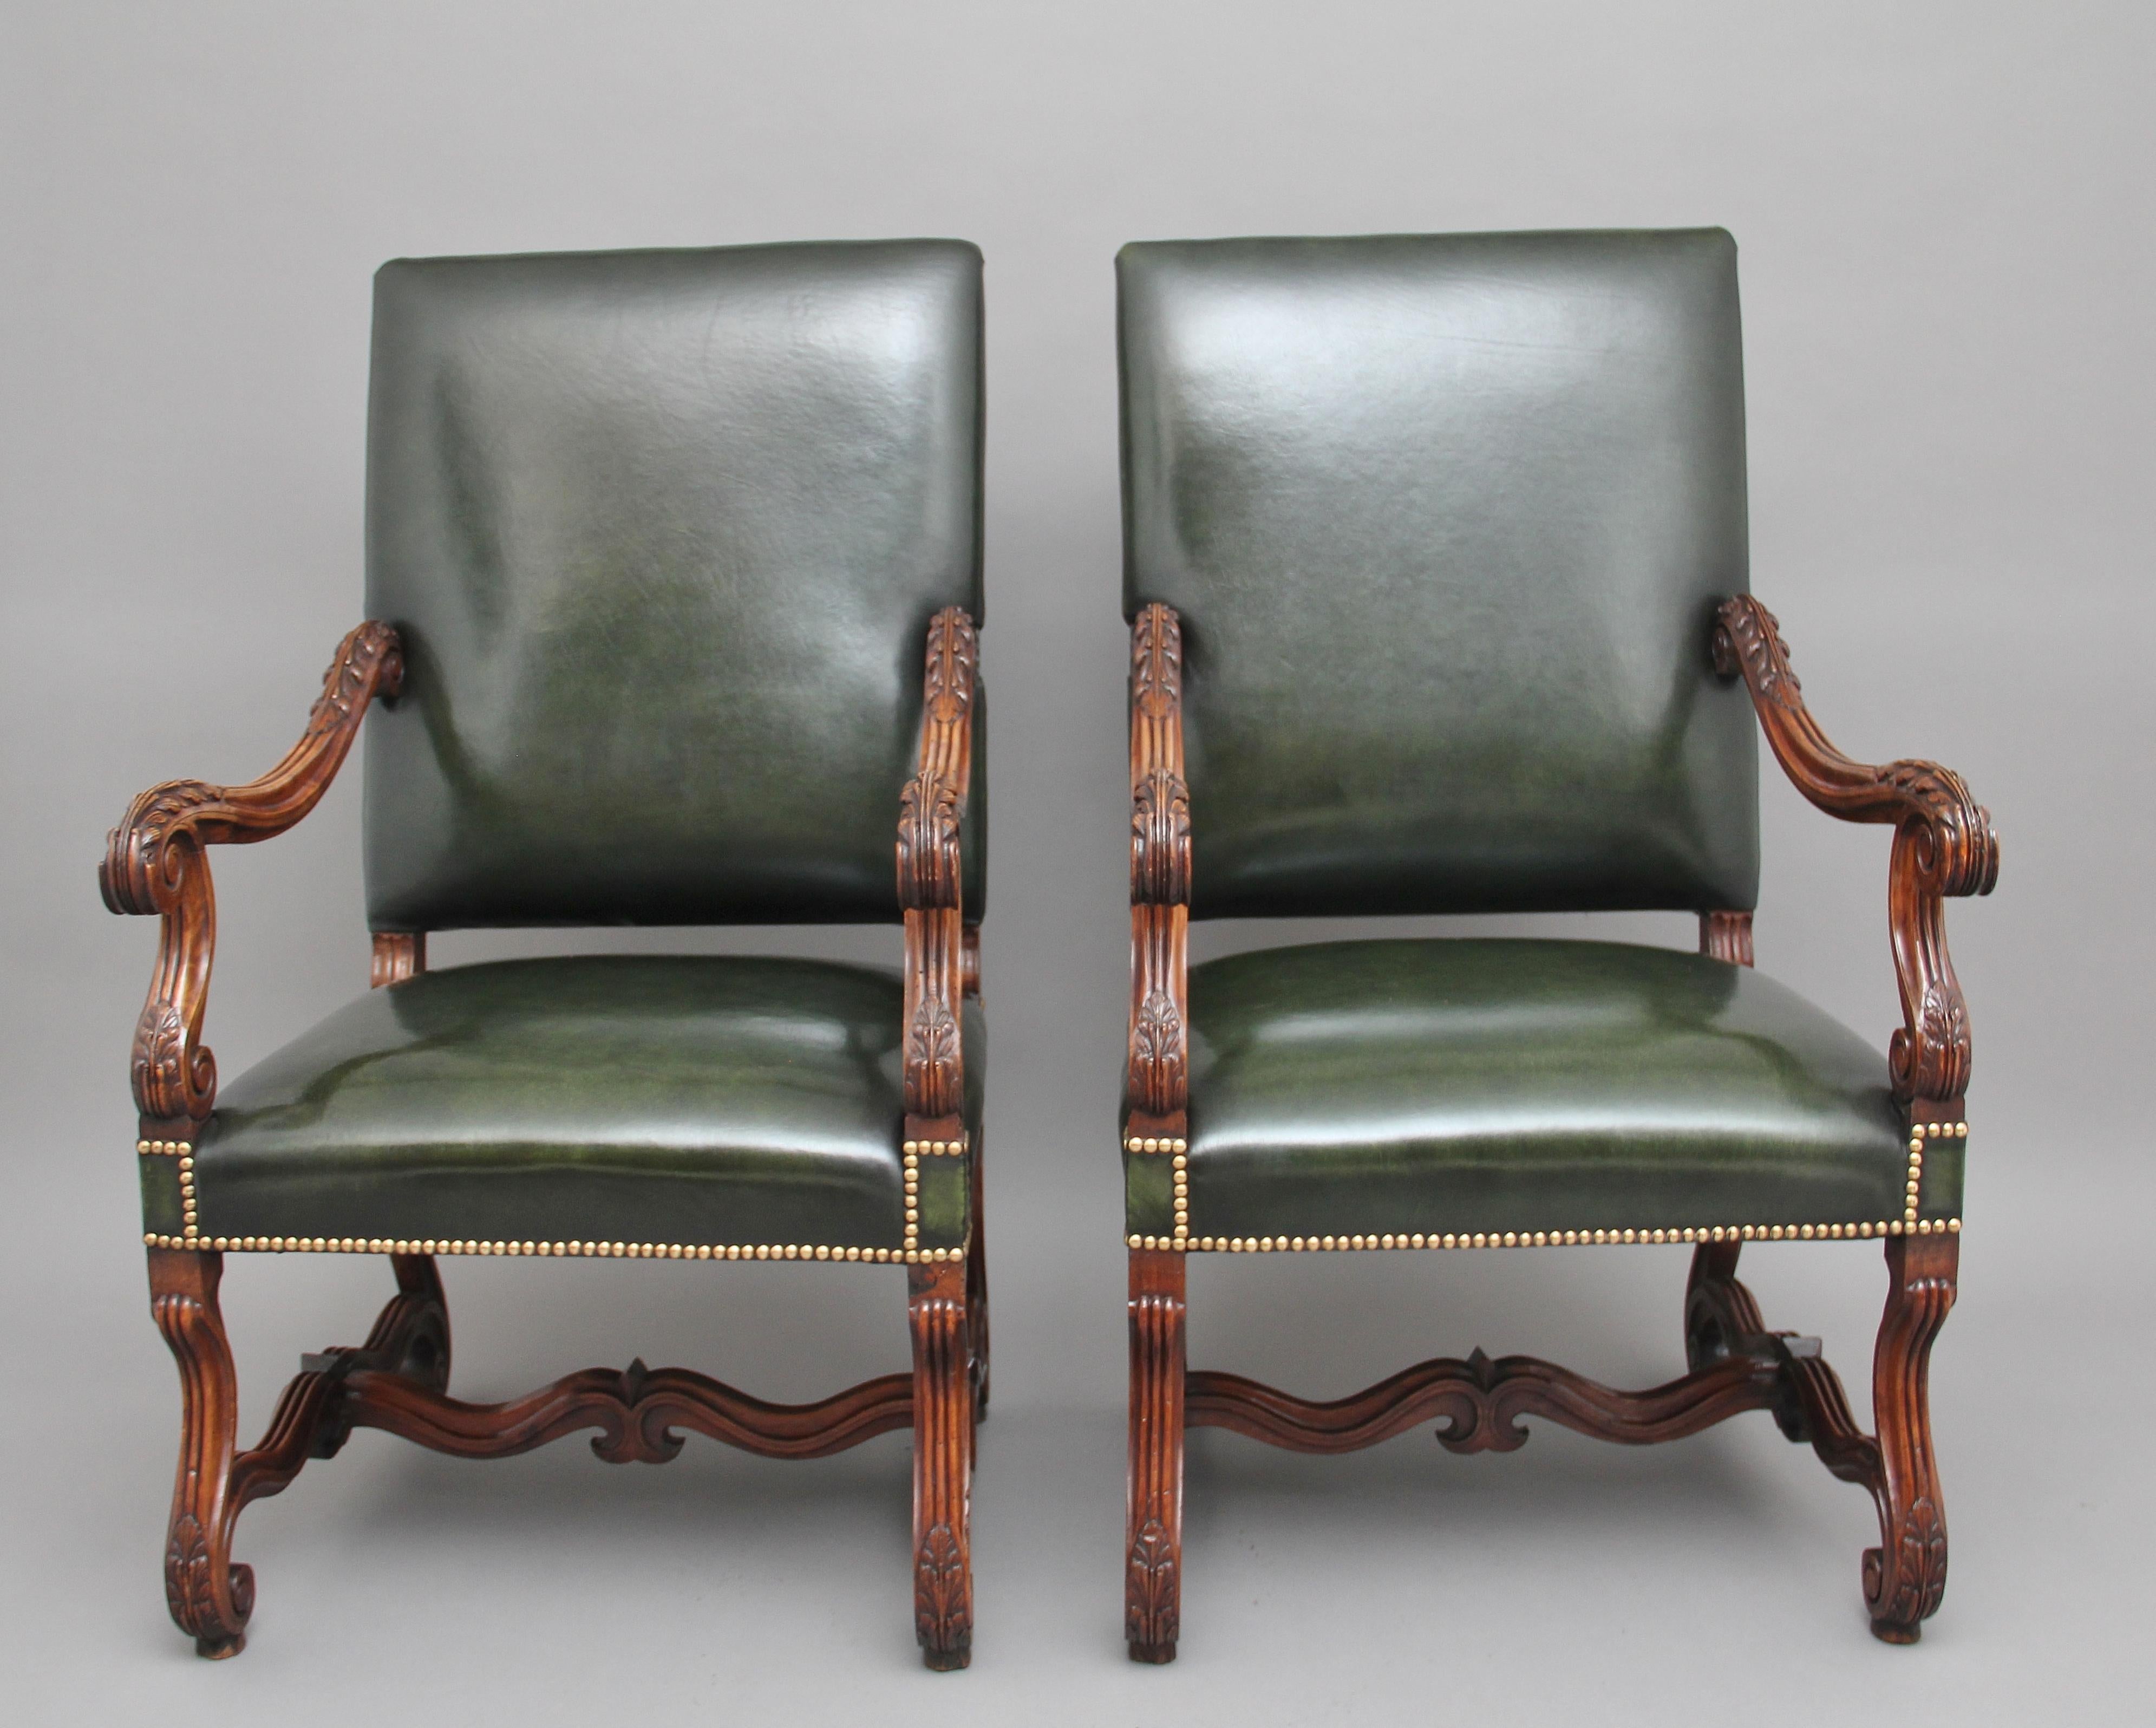 A superb pair of early 19th century French carved walnut armchairs, upholstered in green leather with brass stud decoration, shaped and carved arms with acanthus leaf decoration, supported on elegant shaped legs with carved scroll feet united by a